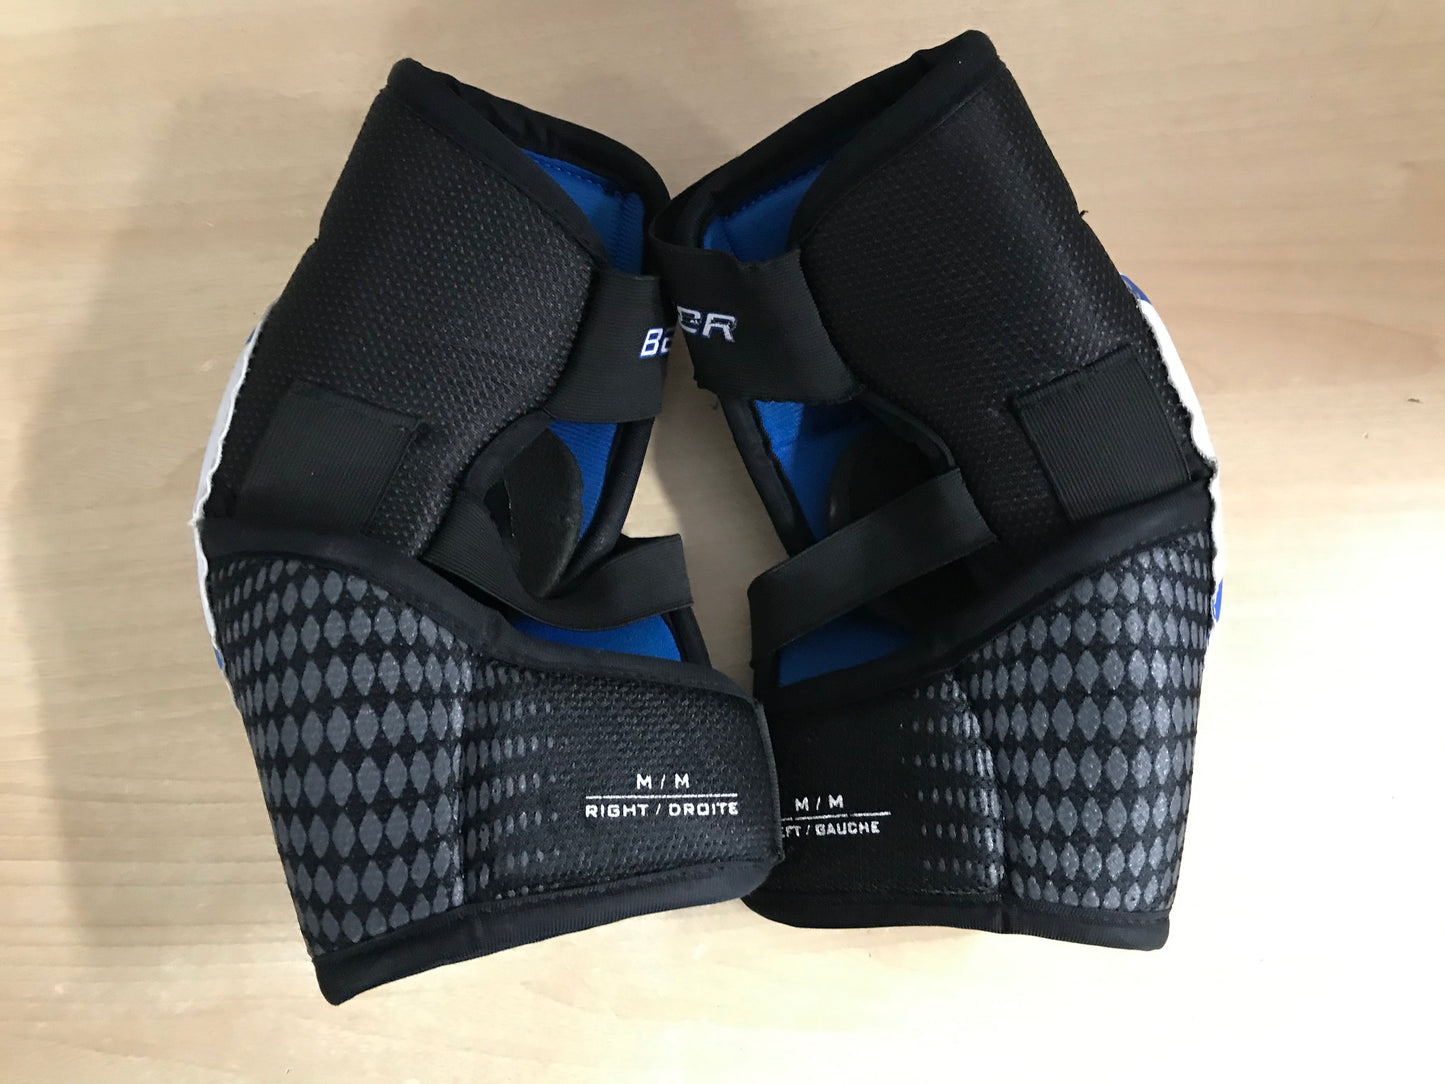 Hockey Elbow Pads Men's Size Small Bauer Supreme One 15 Black Blue White Soft Cup